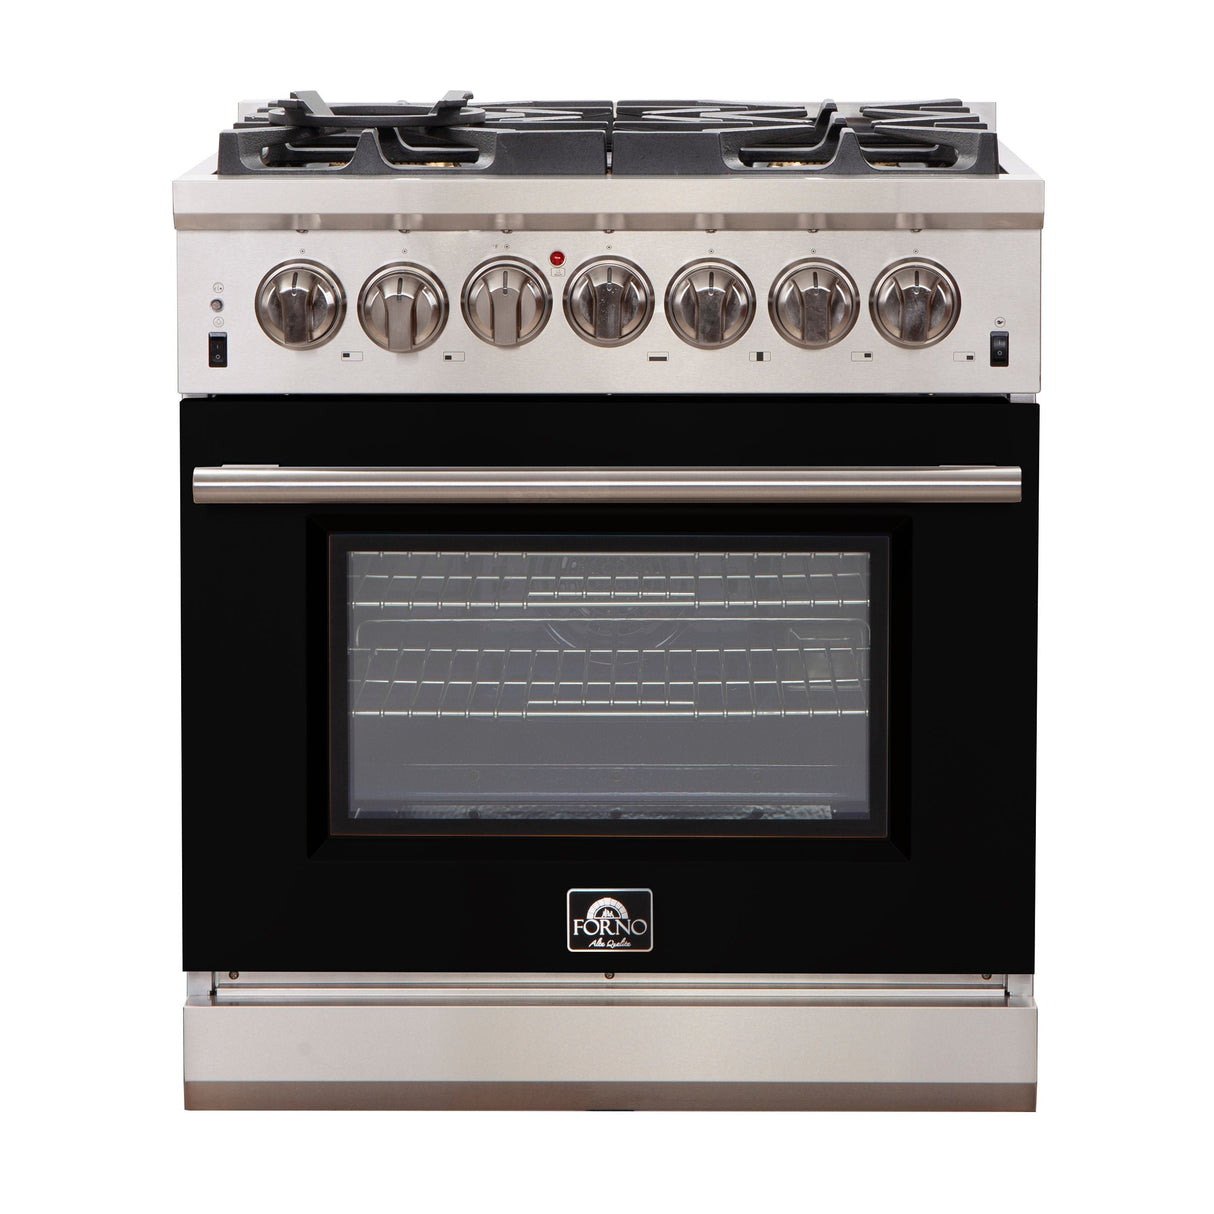 Forno 30-Inch Capriasca Gas Range with 5 Burners and Convection Oven in Stainless Steel with Black Door (FFSGS6260-30BLK)